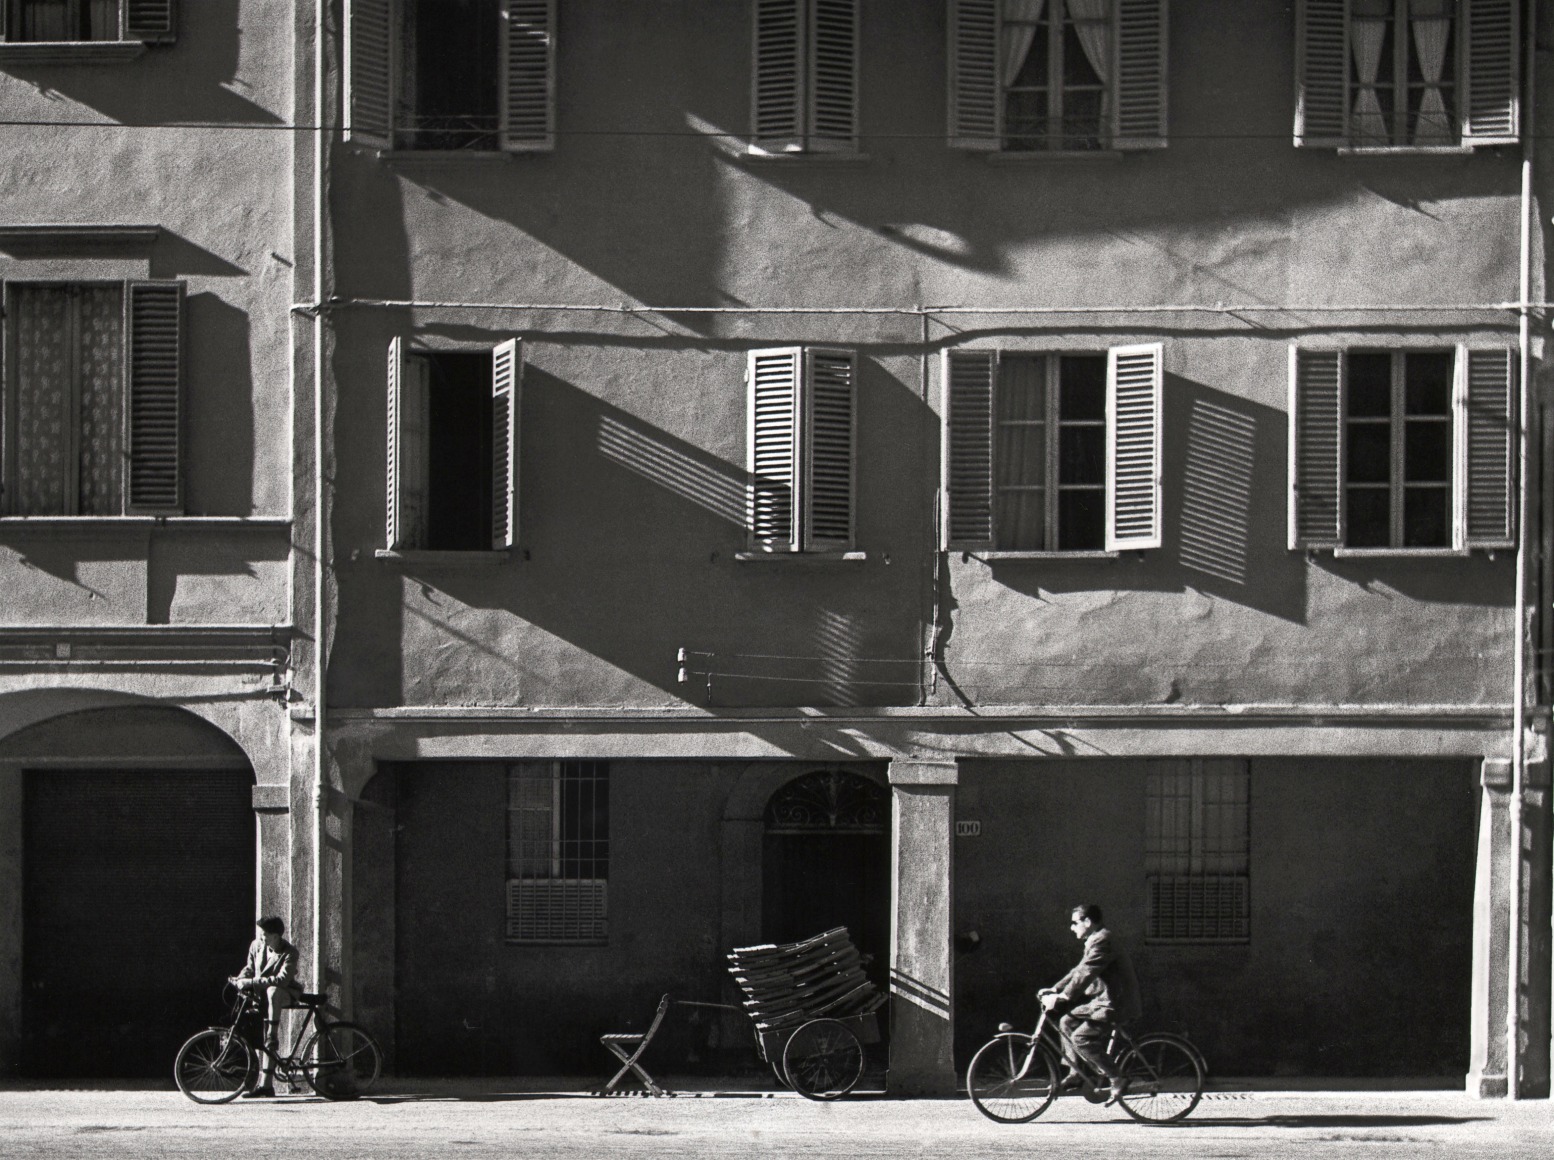 Nino Migliori, The house opposite, 1954. Two men ride bicycles in front of an apartment building